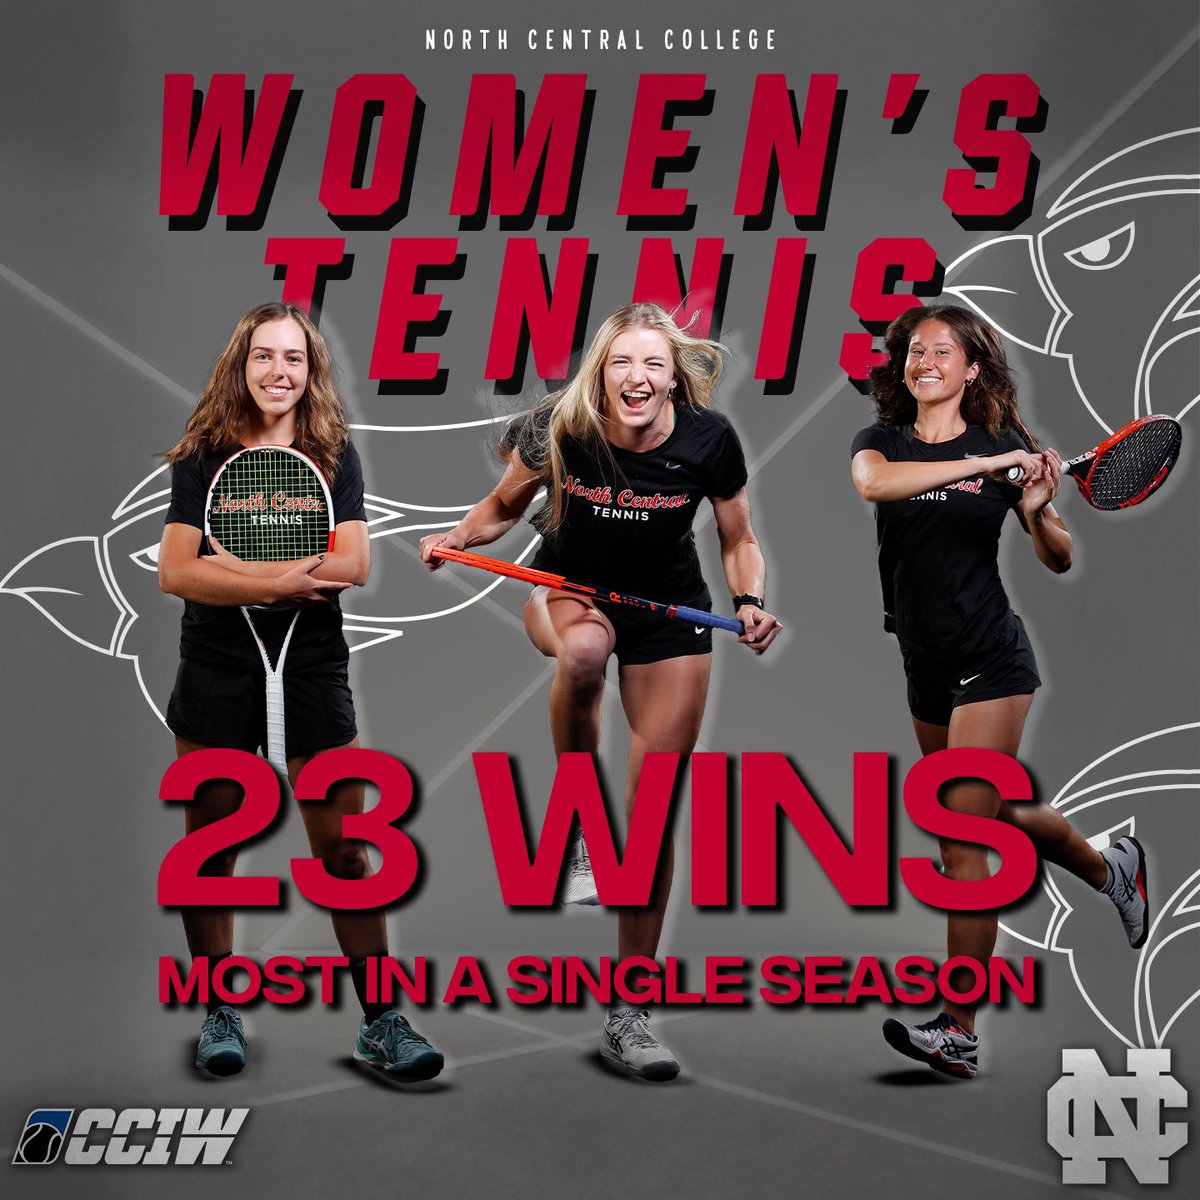 Winning the the CCIW Tournament for the fourth straight season, @NCCWomensTennis beat North Park 5-1 to earn the league’s automatic bid to the NCAA Tournament! With the win, the Cardinals also set a new program record with 23 wins in a single season! #WeAreNC #LetsFly